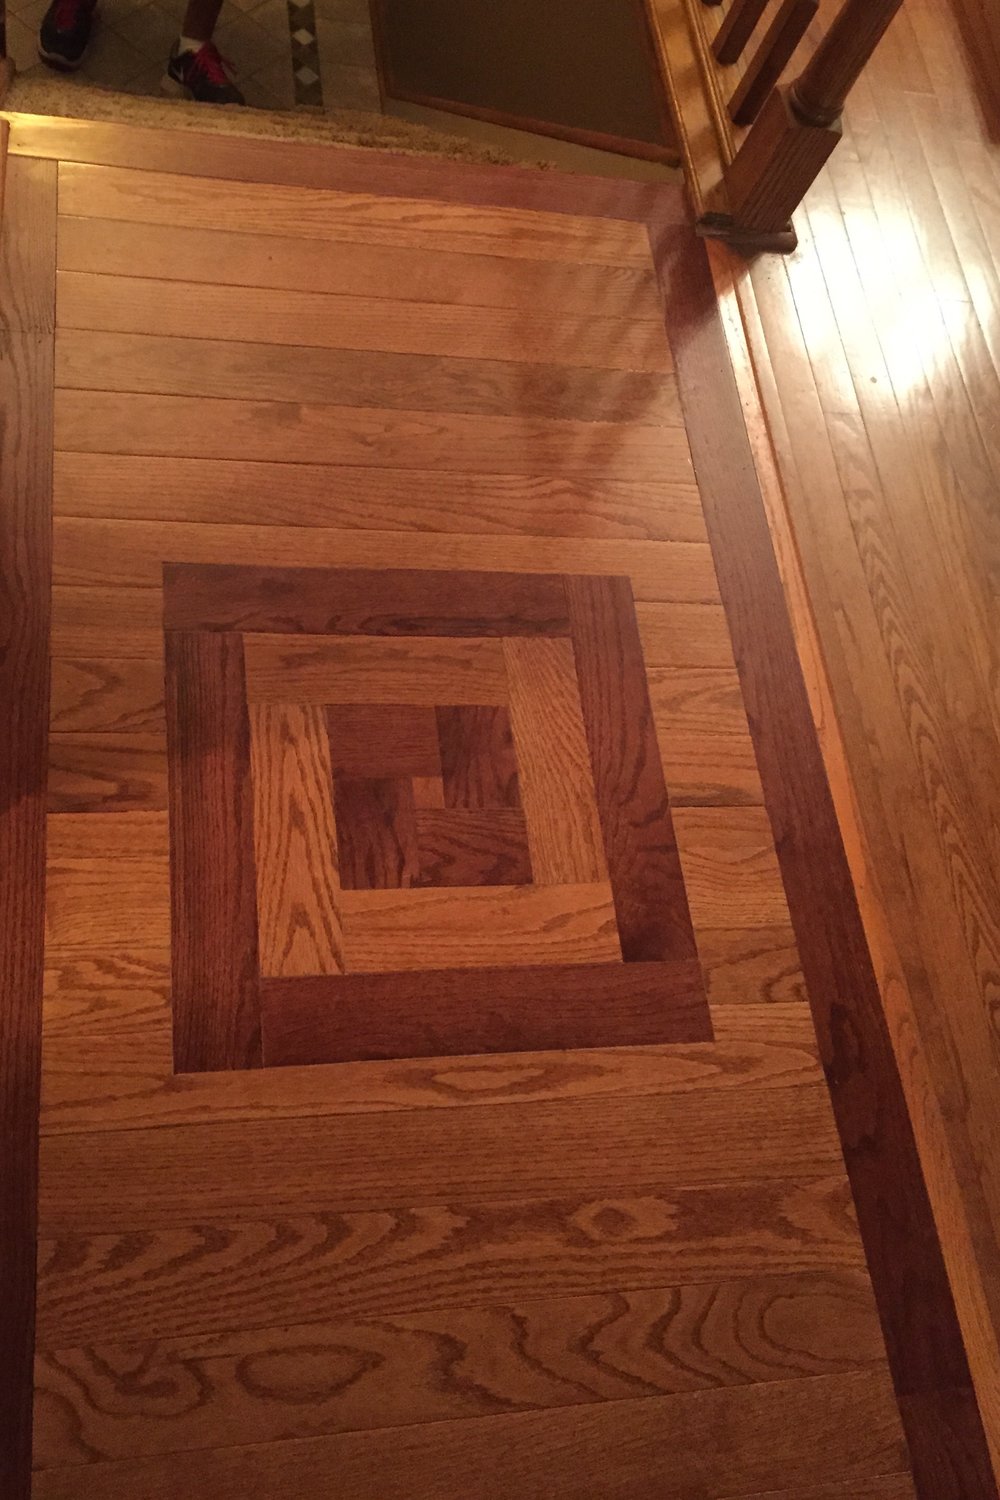 About Transition Flooring Concepts, Hardwood Floor Doorway Transition